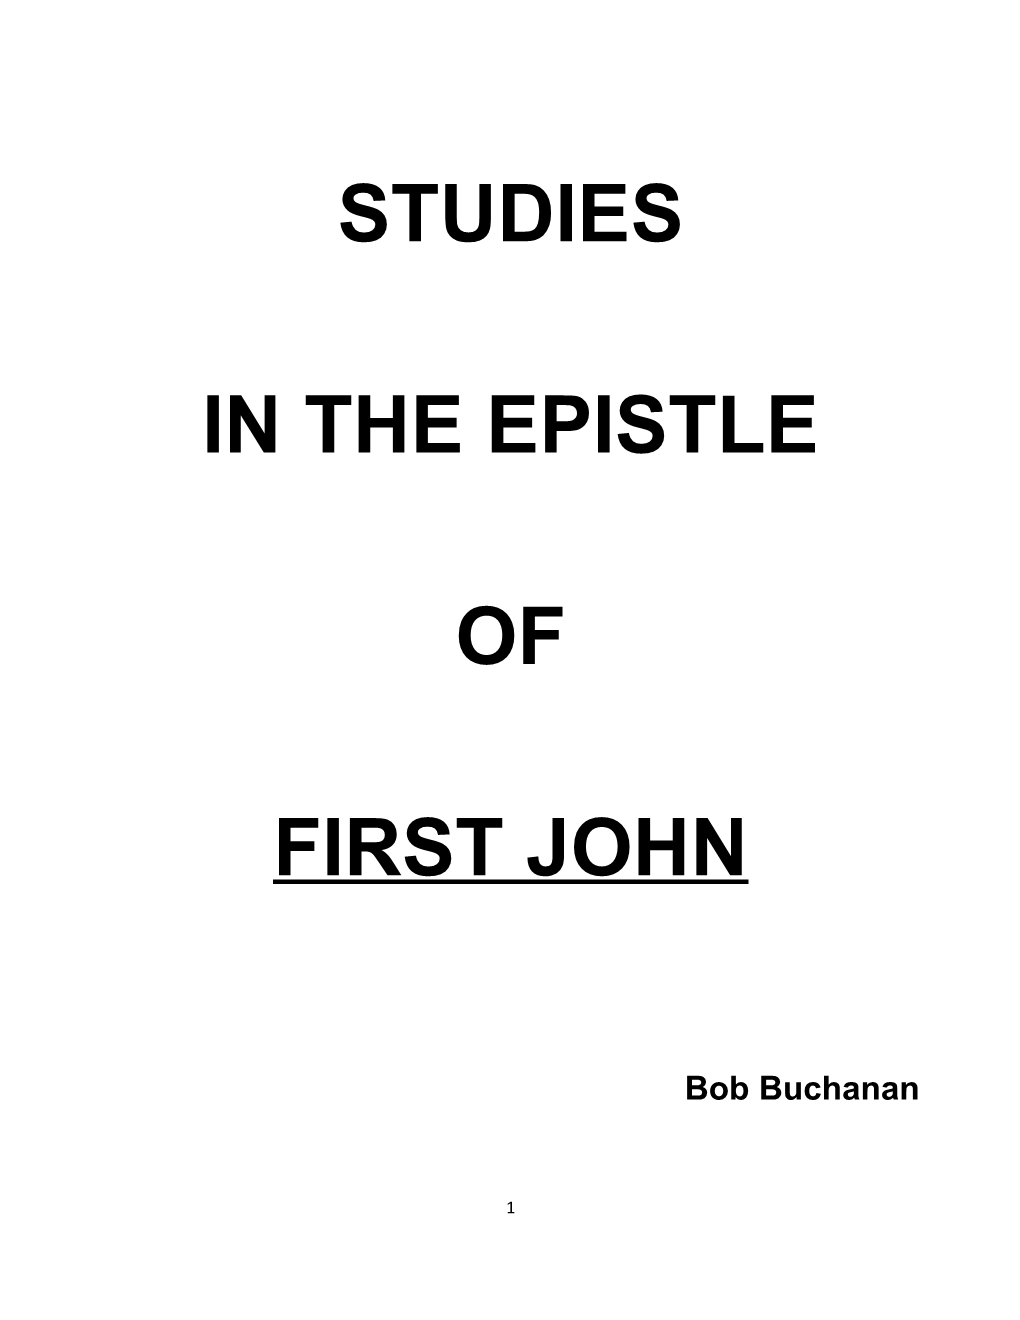 Introduction to the Epistle of First John